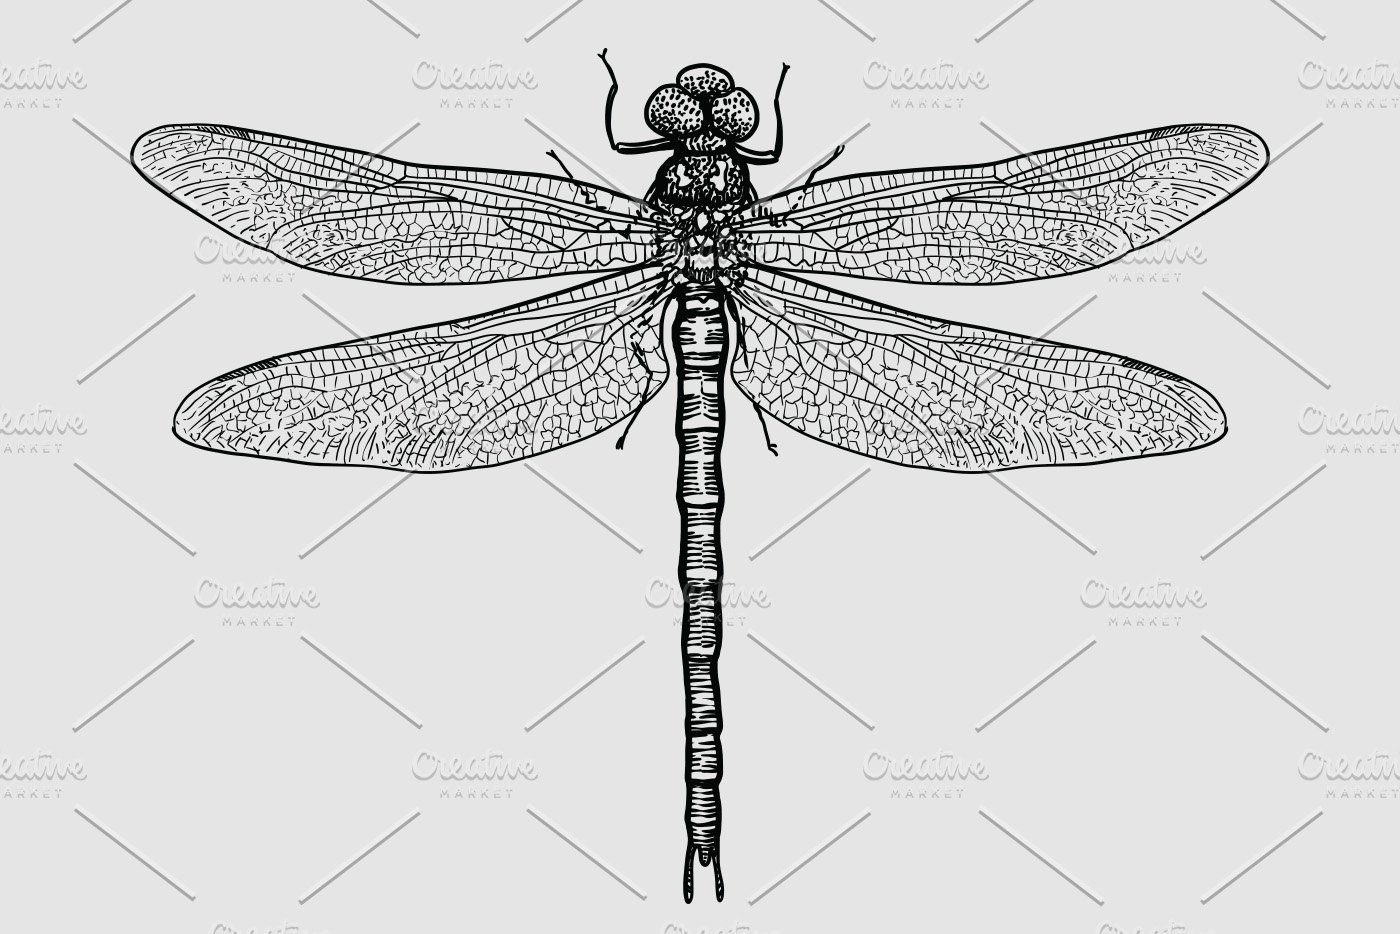 Dragonfly illustration cover image.